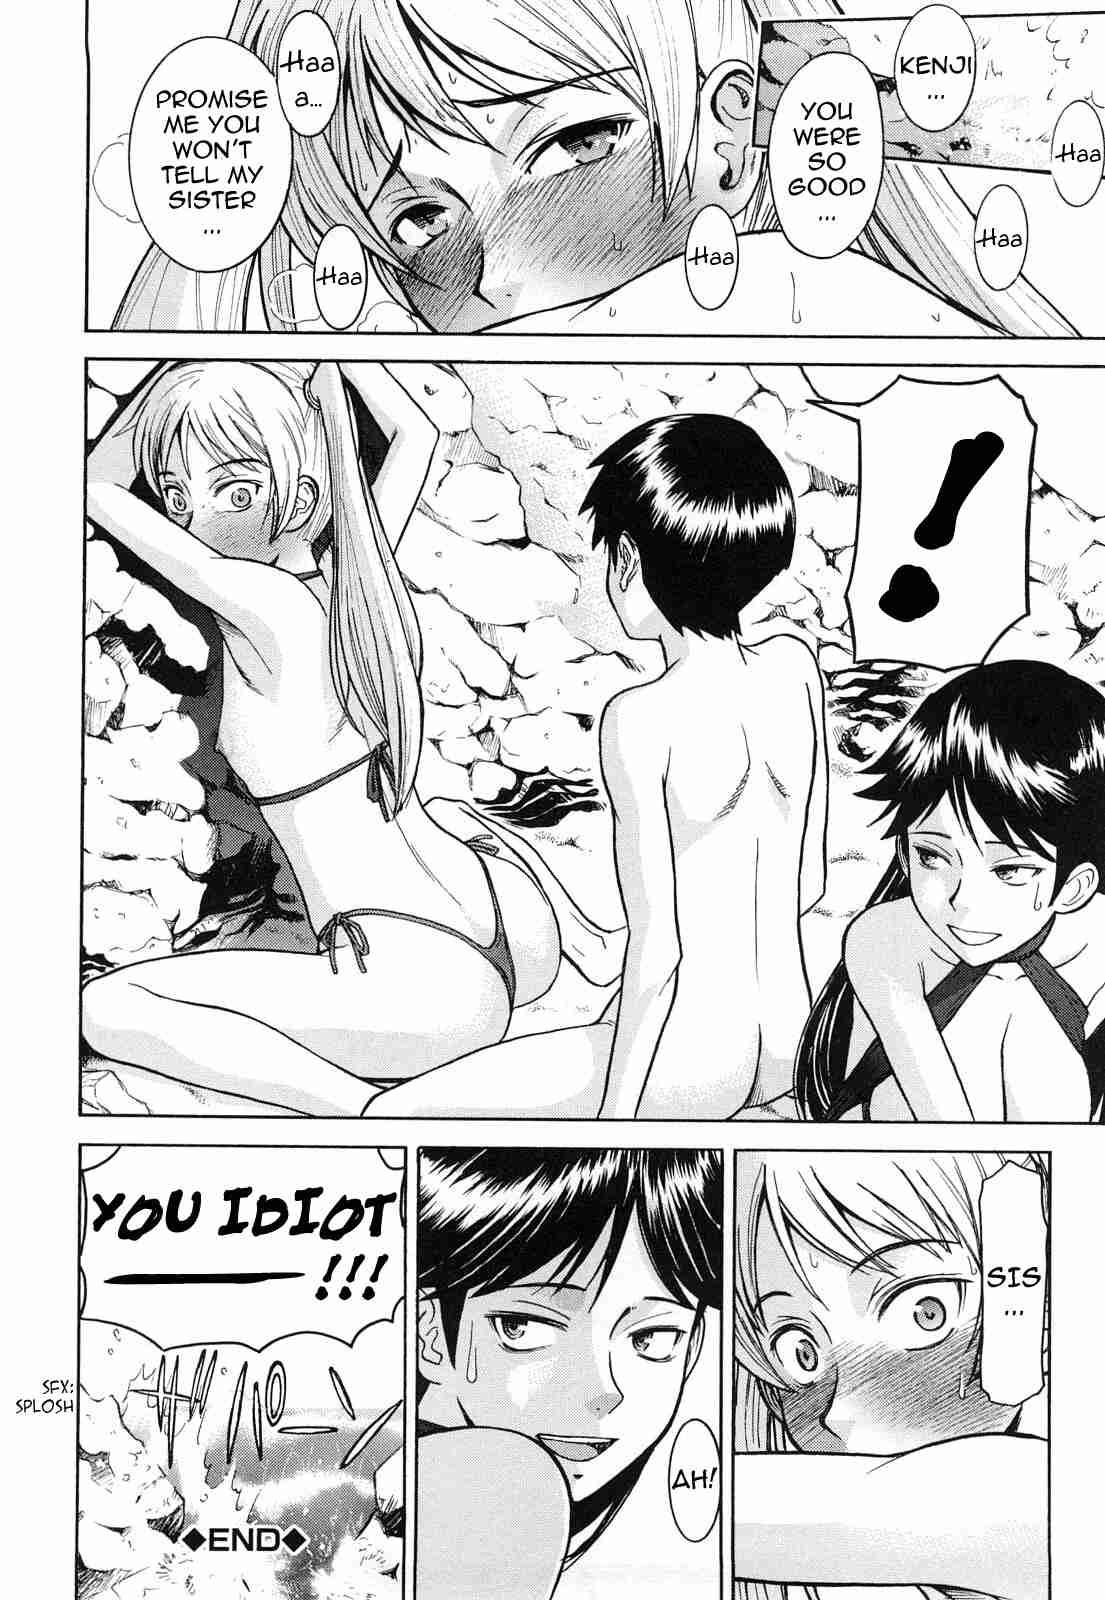 Reading Sex Education Hentai 1 Sex Education [end] Page 206 Hentai Manga Online At Hentai2read